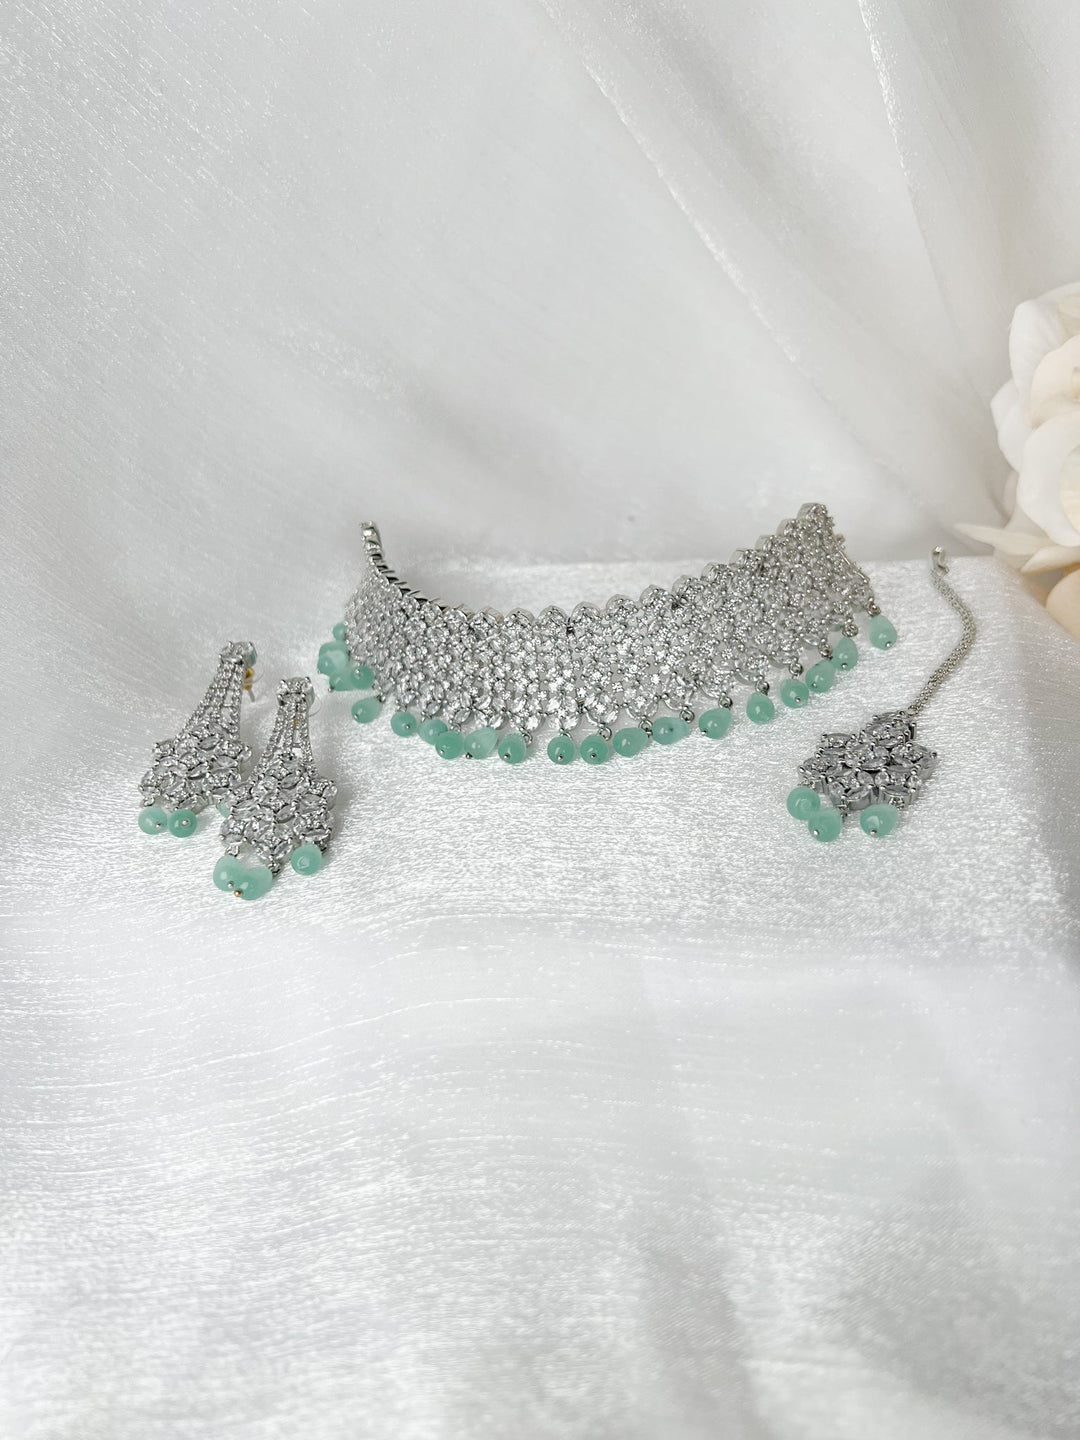 Dearly in Silver & Mint Necklace Sets THE KUNDAN SHOP 